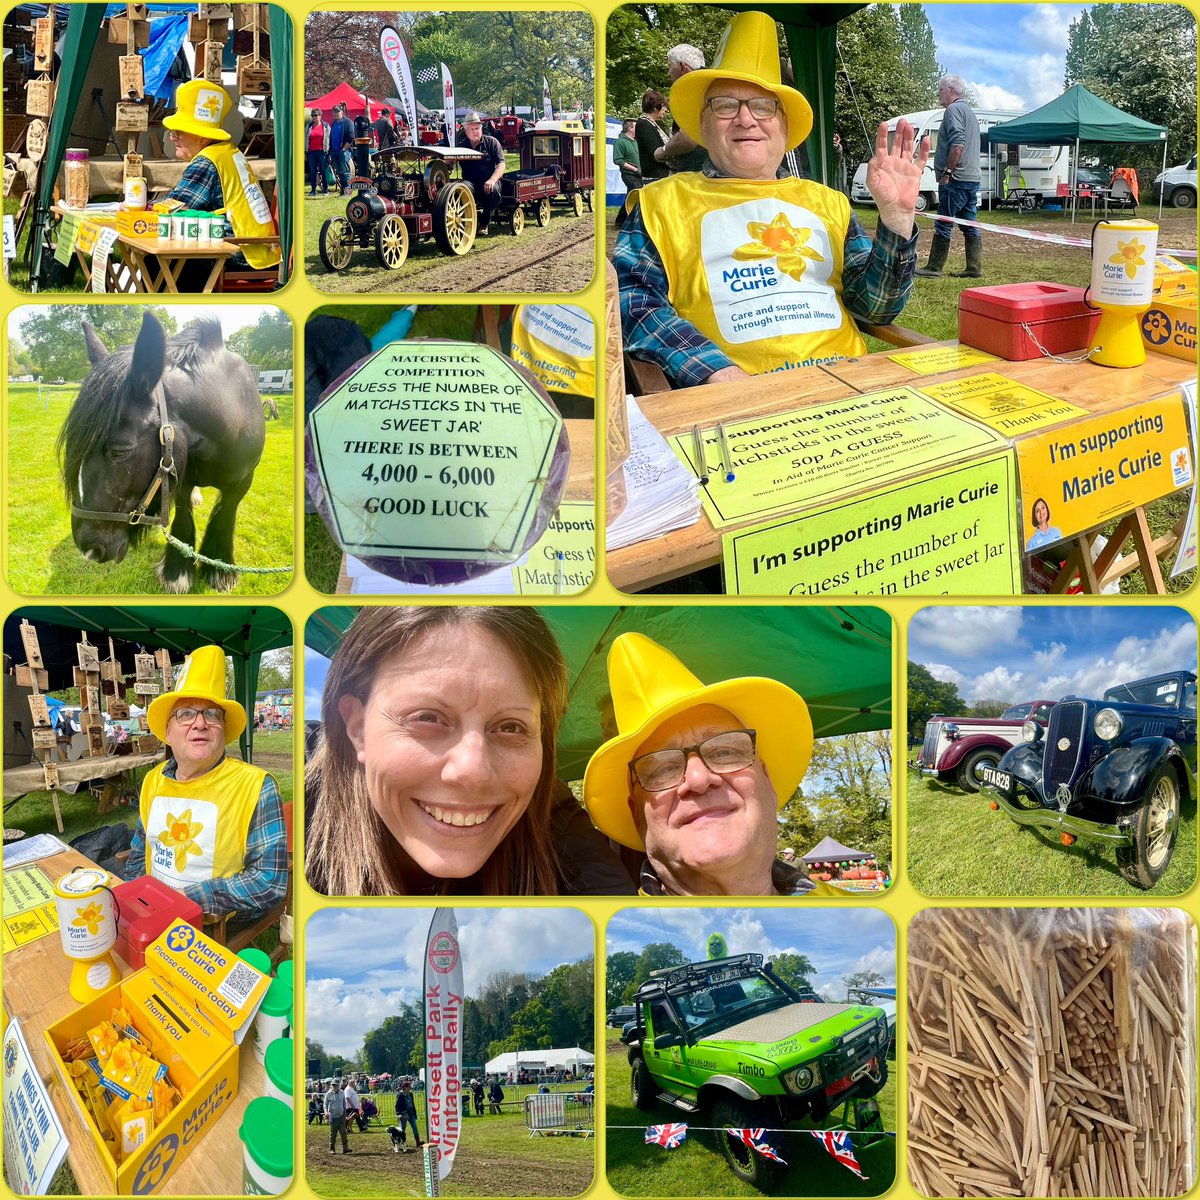 It may be a bank holiday but @mariecurieuk fundraising continues in #Norfolk! Visited supporter & volunteer Jim who collects 8hrs per shift & has stands for us like today at @Stradsett_Rally #WestNorfolk. Thank you Jim & enjoy the next 3 days. He’s raised approx £8k to date 👏🙏